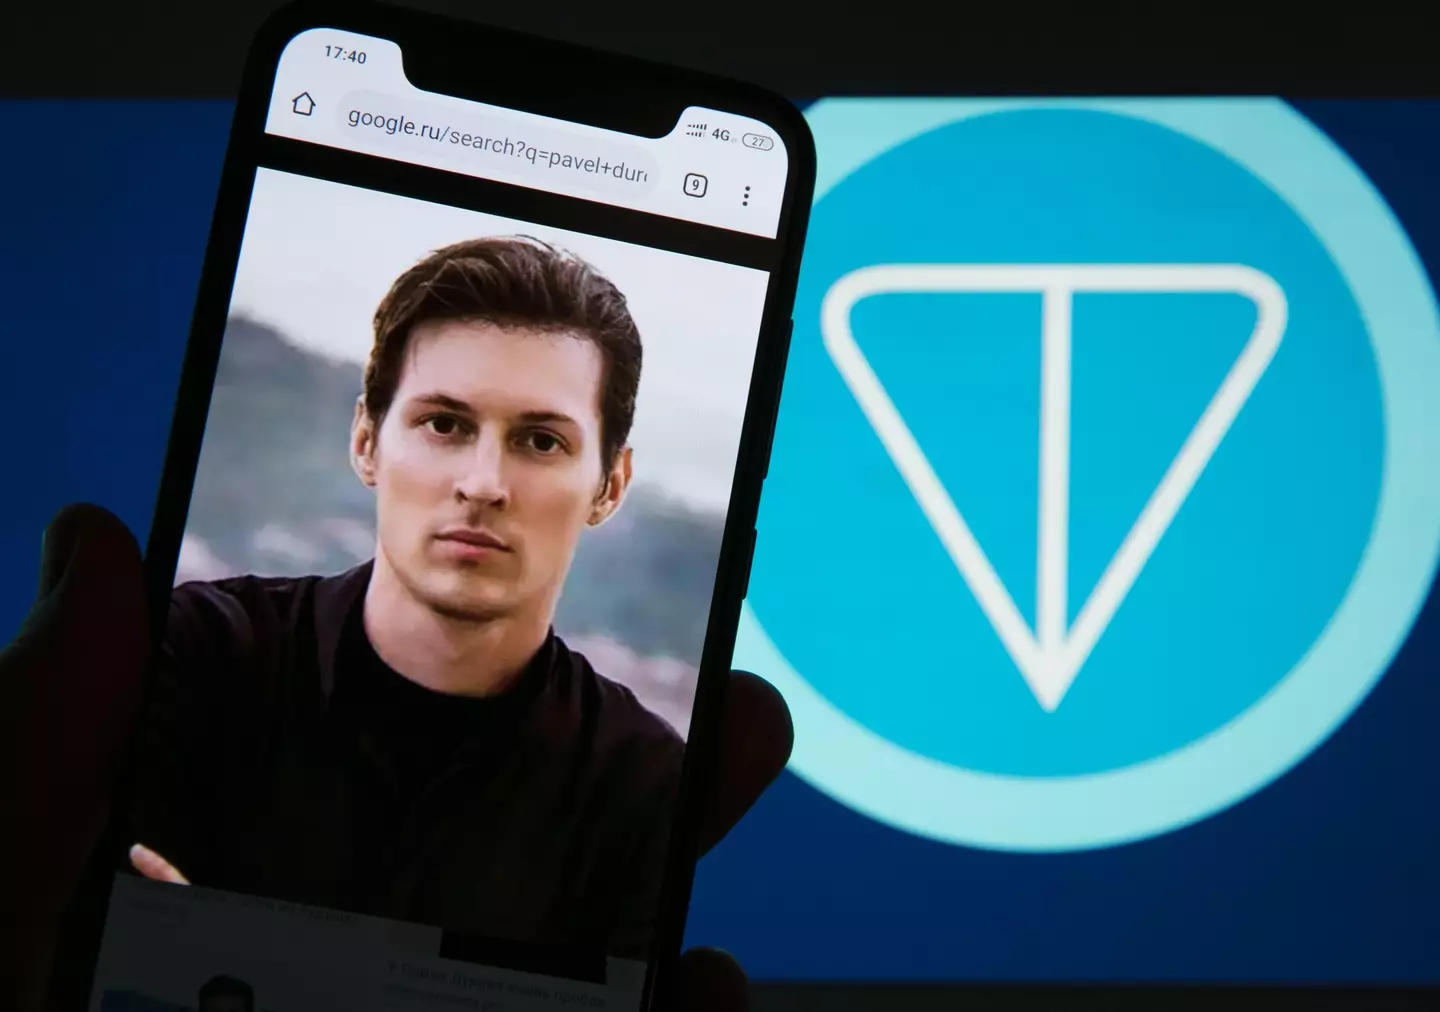 Pavel Durov is the co-founder of Telegram. (Alamy)